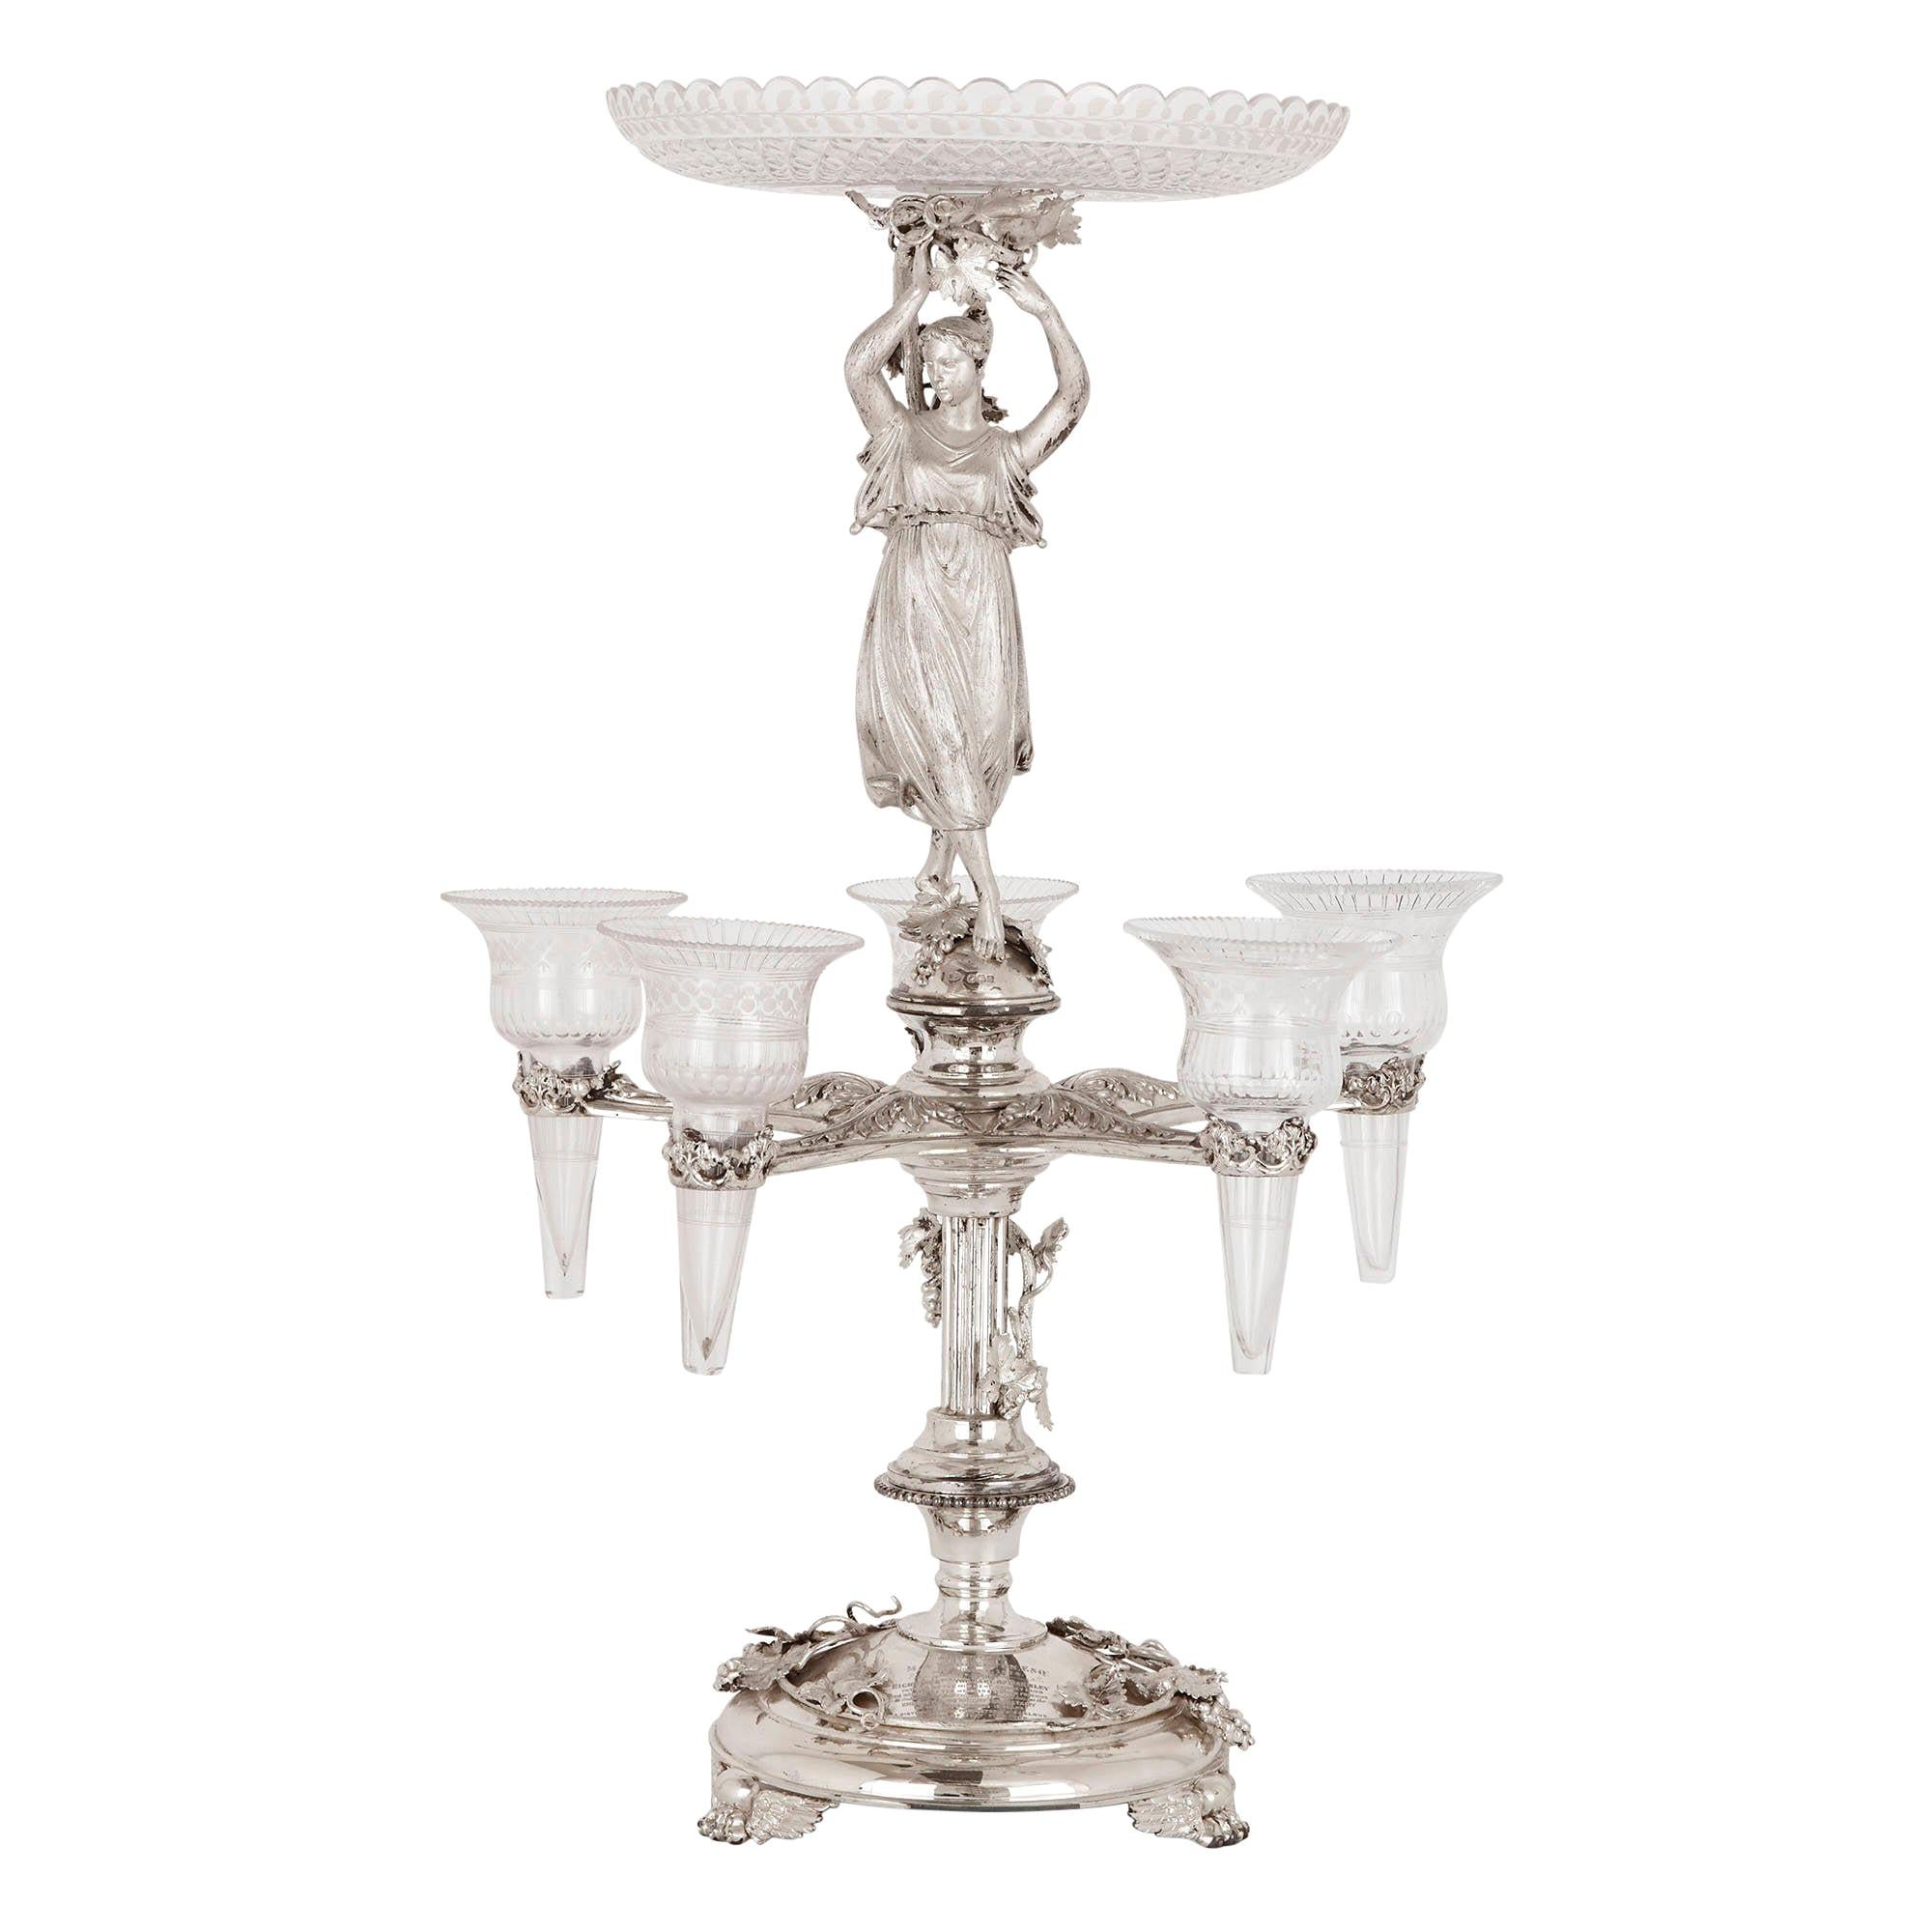 Silver and glass epergne by Stephen Smith & Son of London